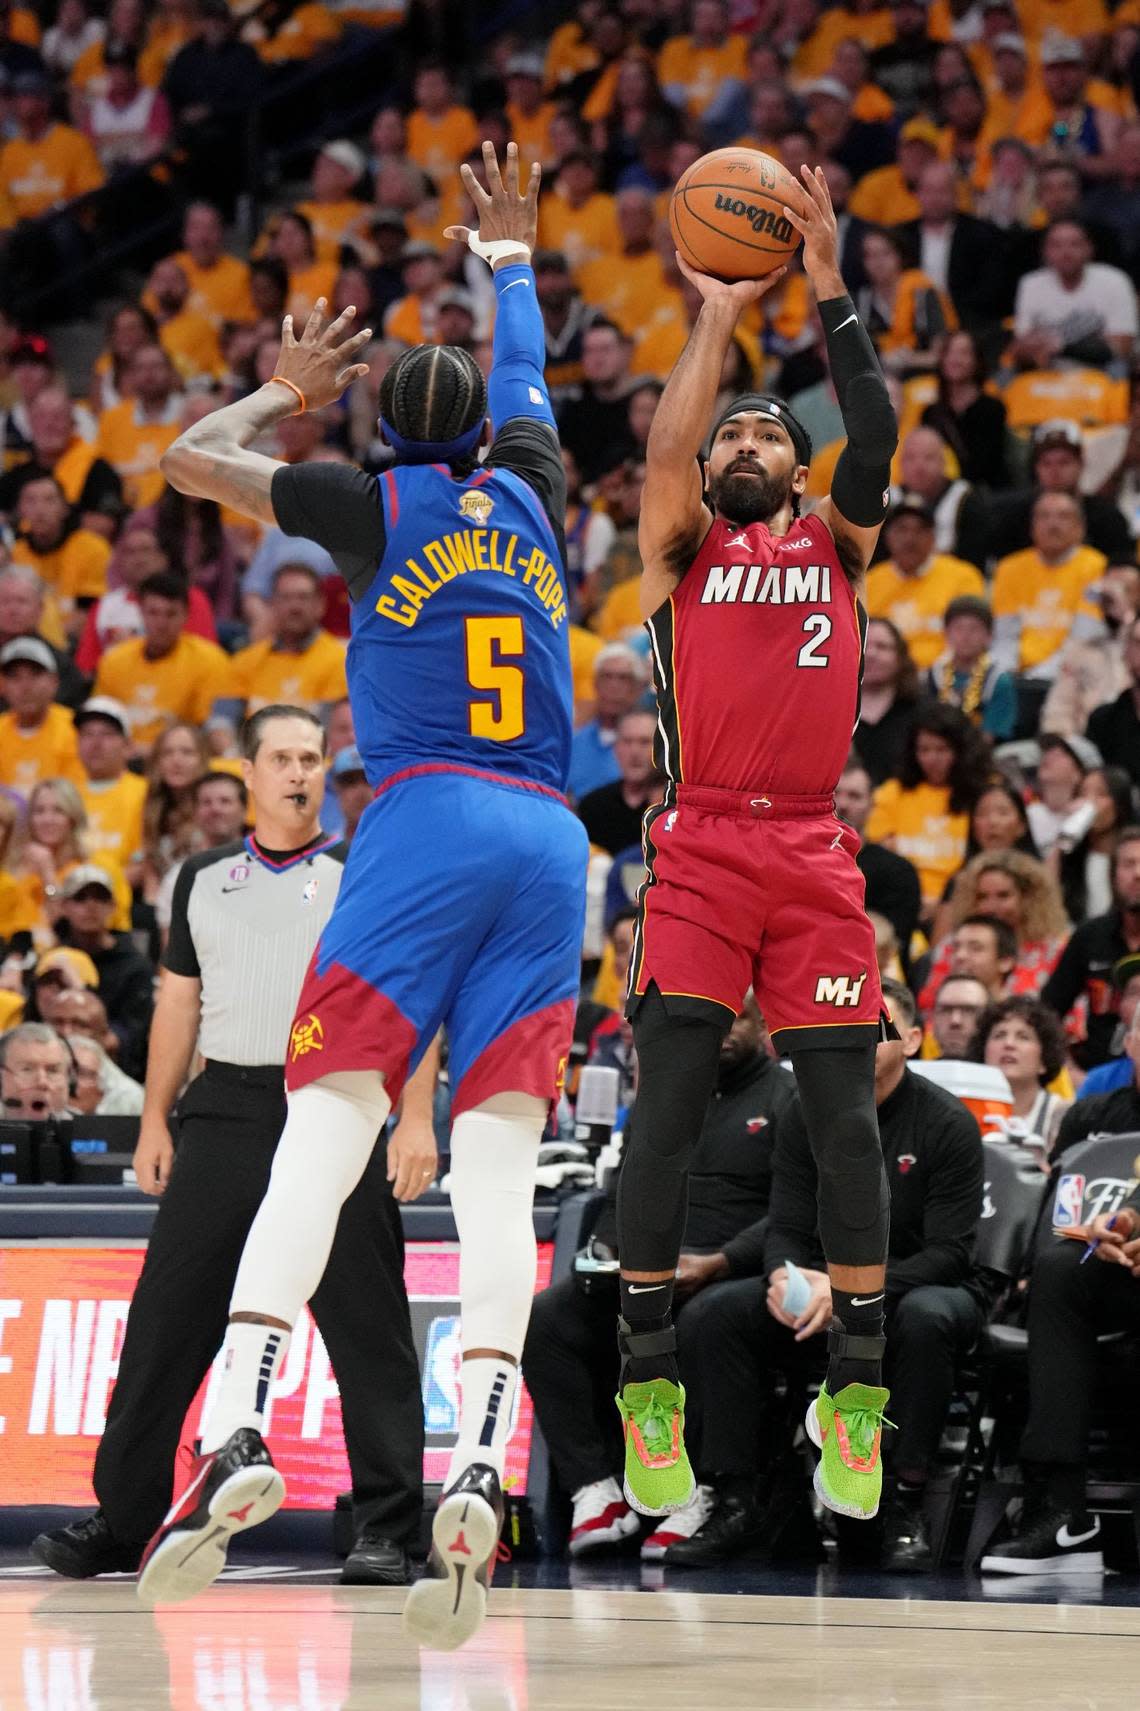 Jun 1, 2023; Denver, CO, USA; Miami Heat guard Gabe Vincent (2) shoots the ball against Denver Nuggets guard Kentavious Caldwell-Pope (5) in game one of the 2023 NBA Finals at Ball Arena. Mandatory Credit: Kyle Terada-USA TODAY Sports